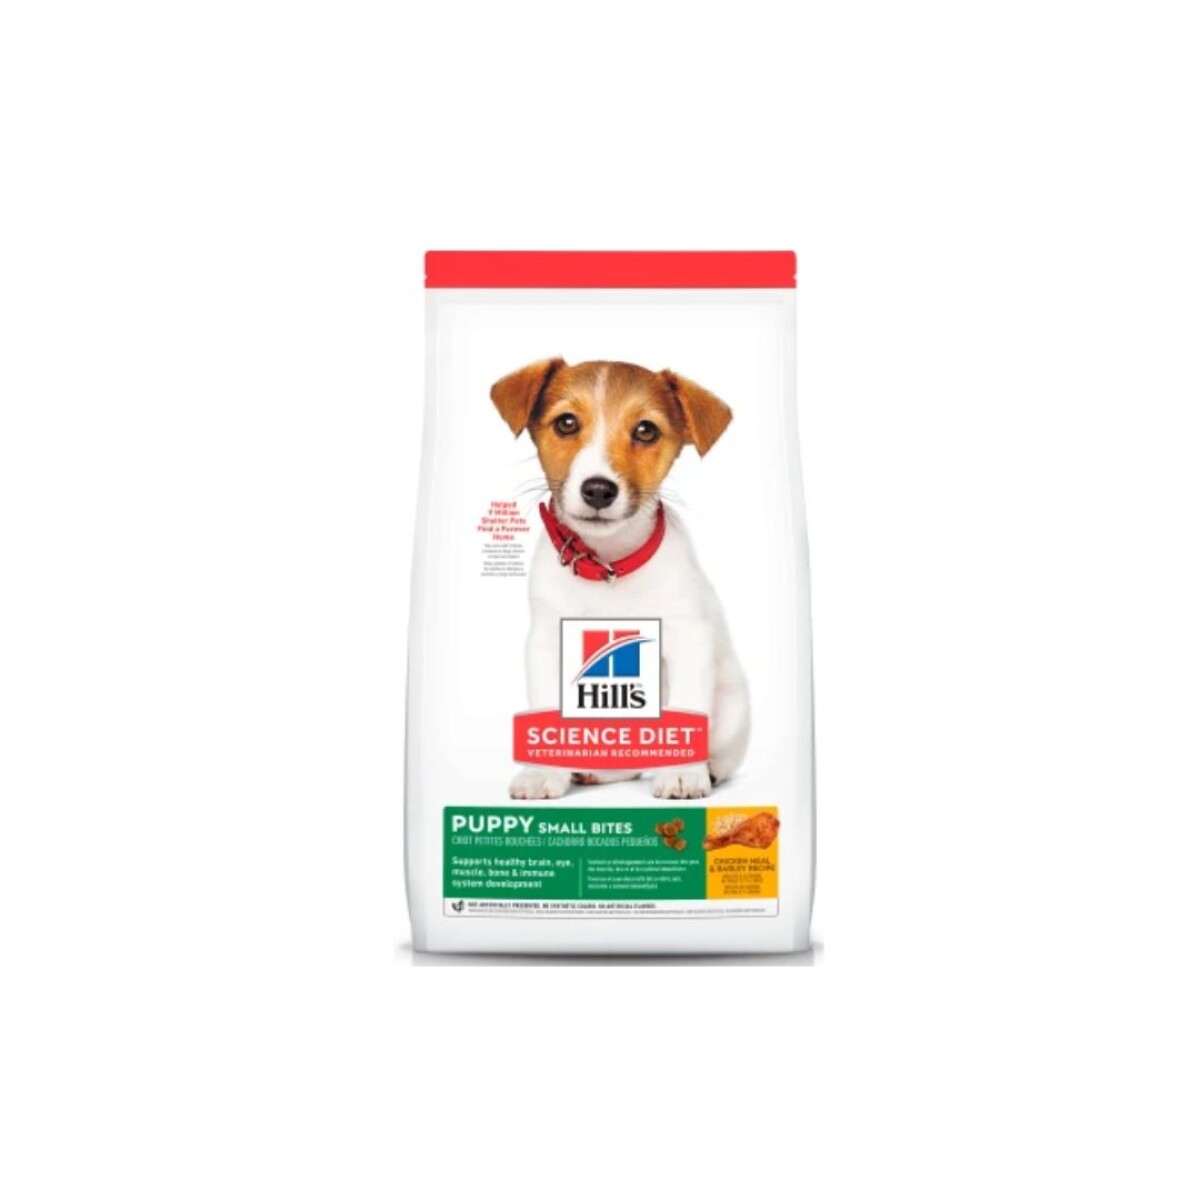 HILLS CANINE PUPPY SMALL BITES 7 KG - Unica 